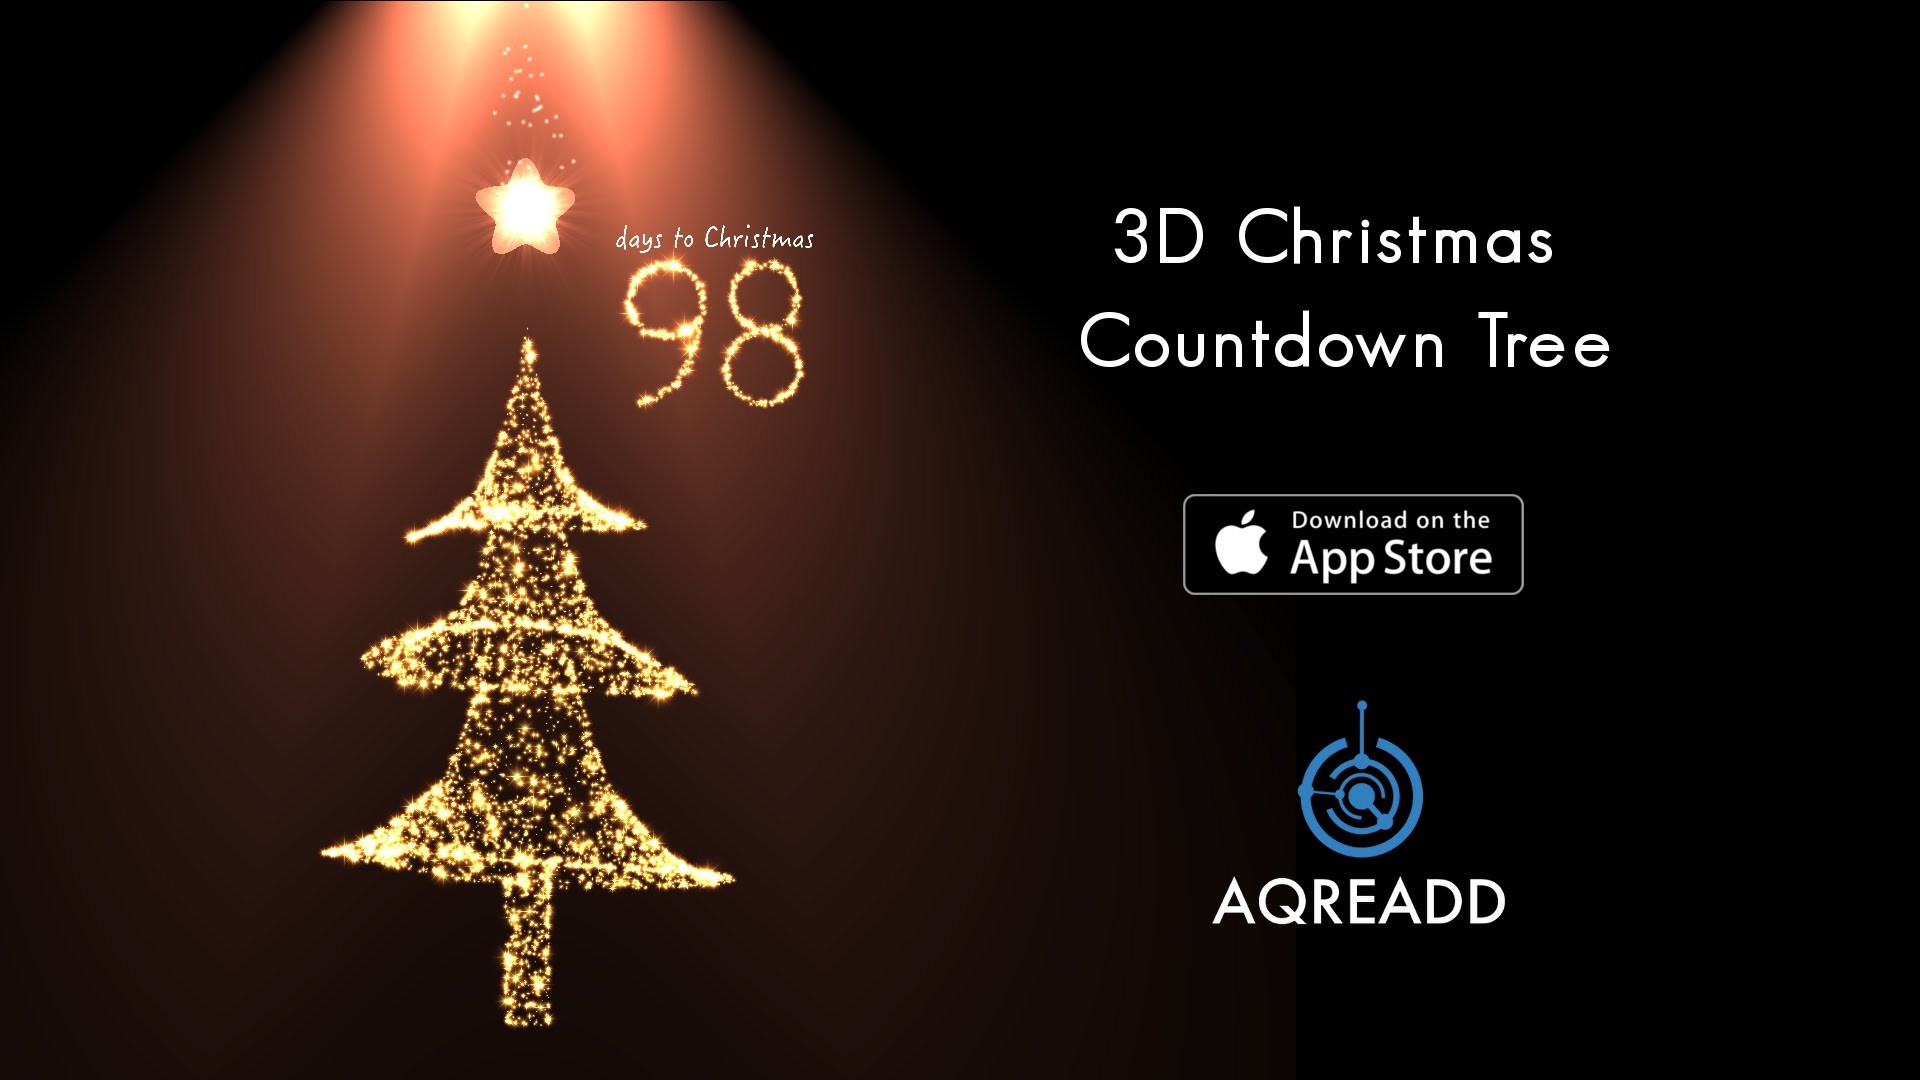 3D Christmas Countdown Tree for iPhone 6, iPhone 6 plus, iPhone 5s iPad – YouTube